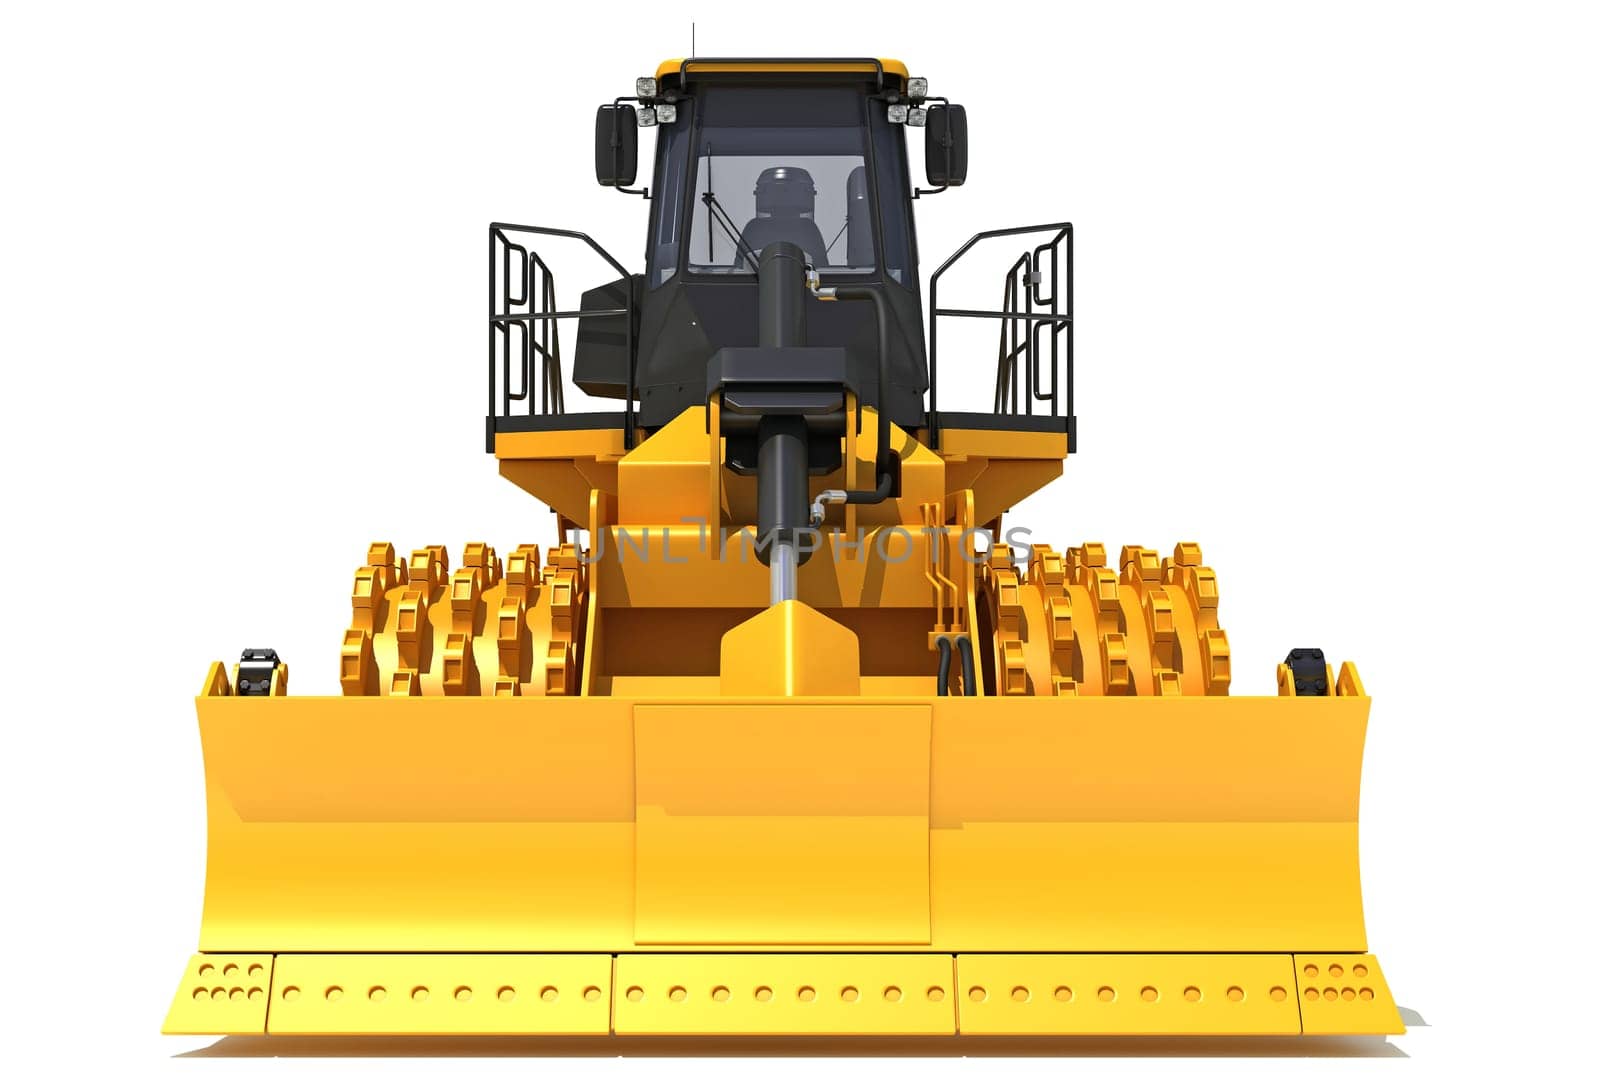 Soil Compactor 3D rendering on white background by 3DHorse